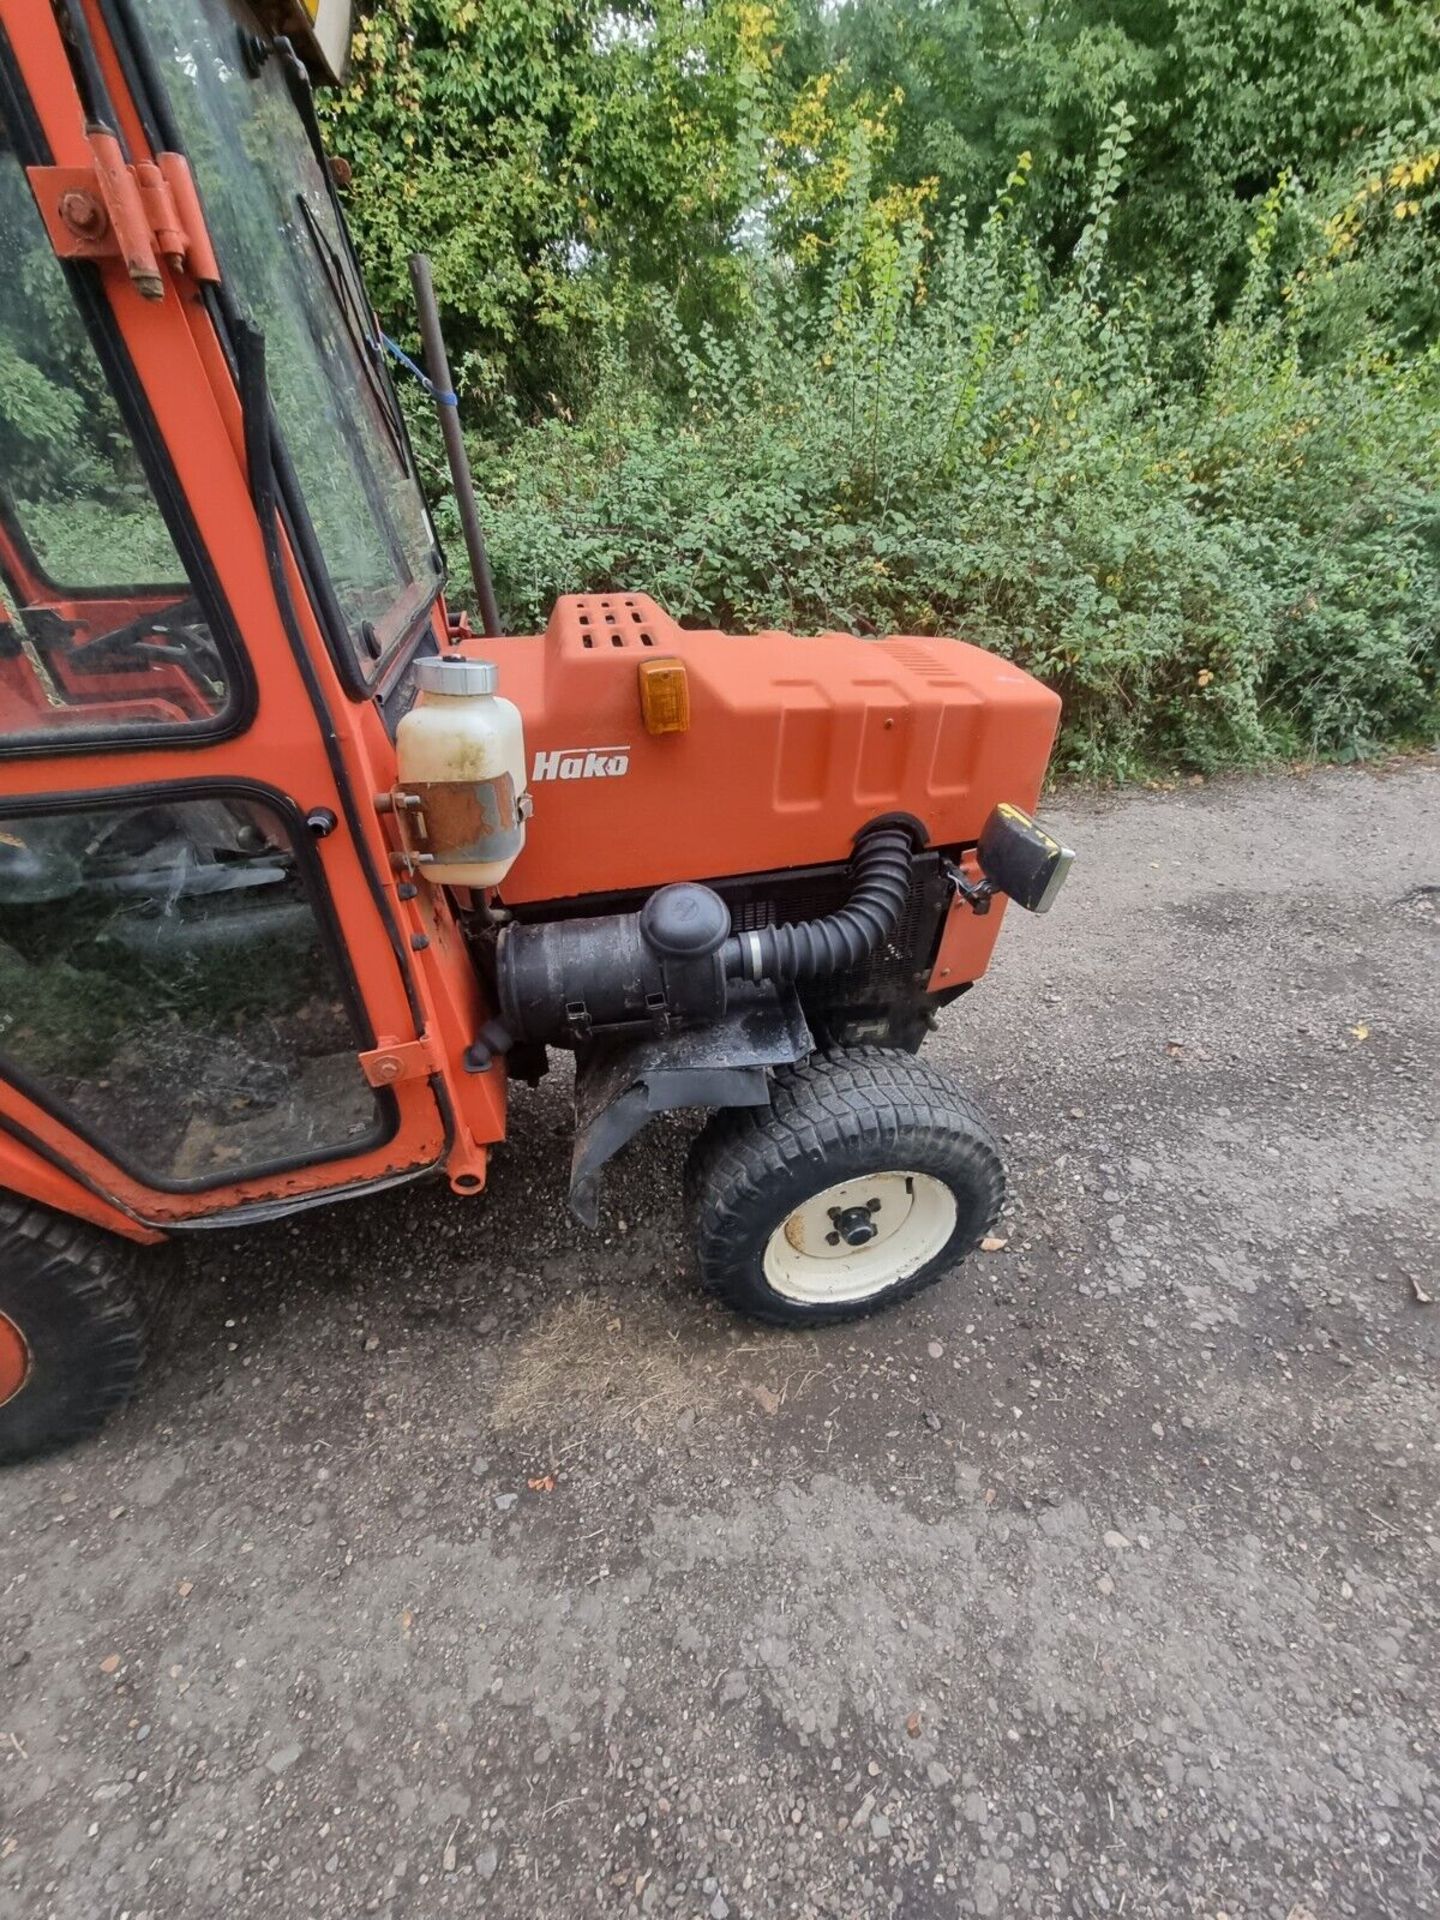 1987 HAKO TRACTOR 2WD - Image 2 of 6